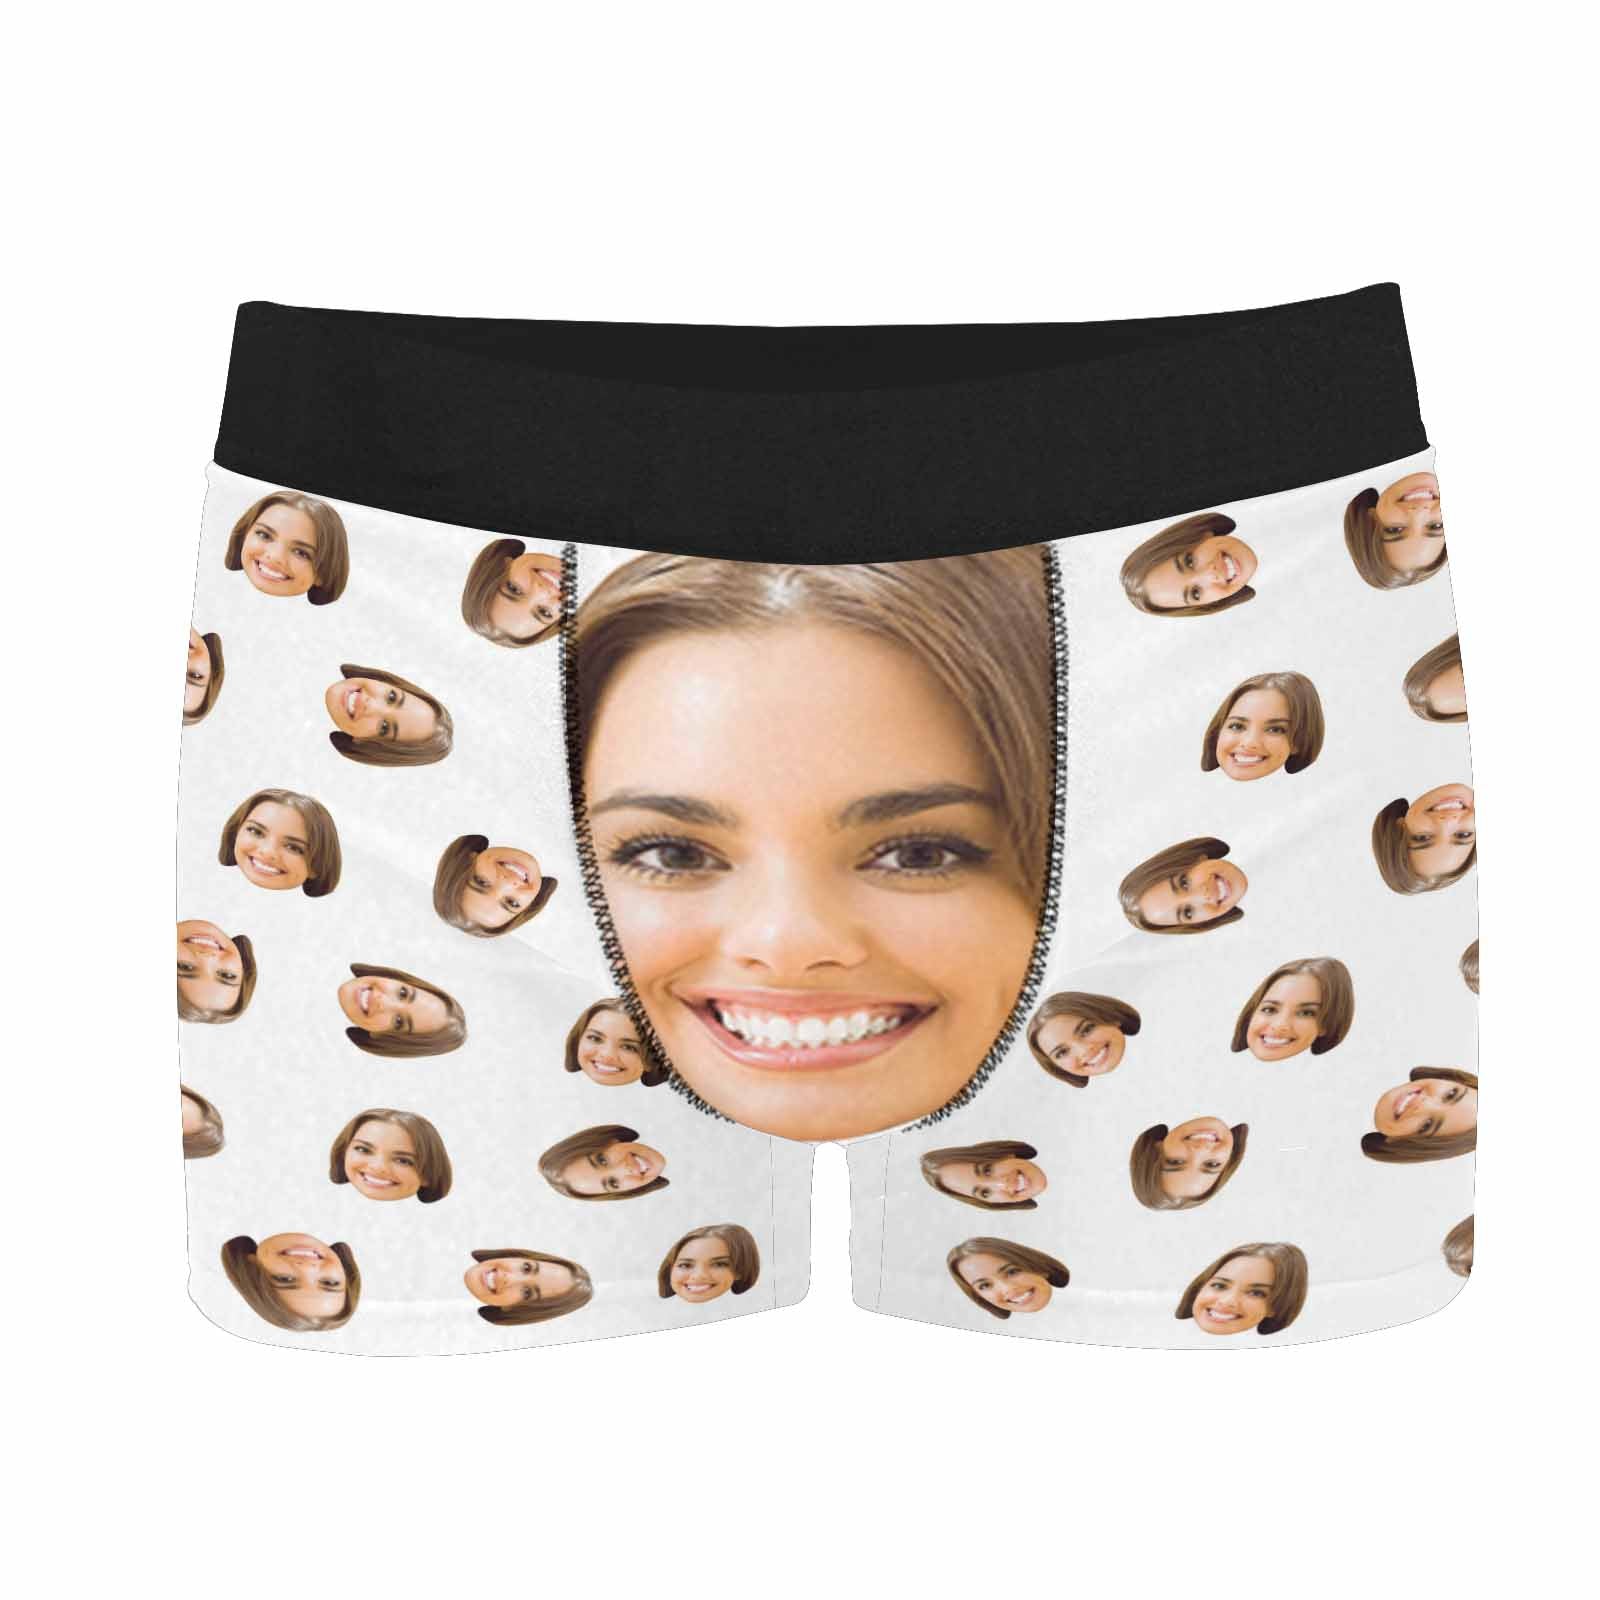 Custom Boxers for Men with Face on Mens Novelty Boxers Briefs